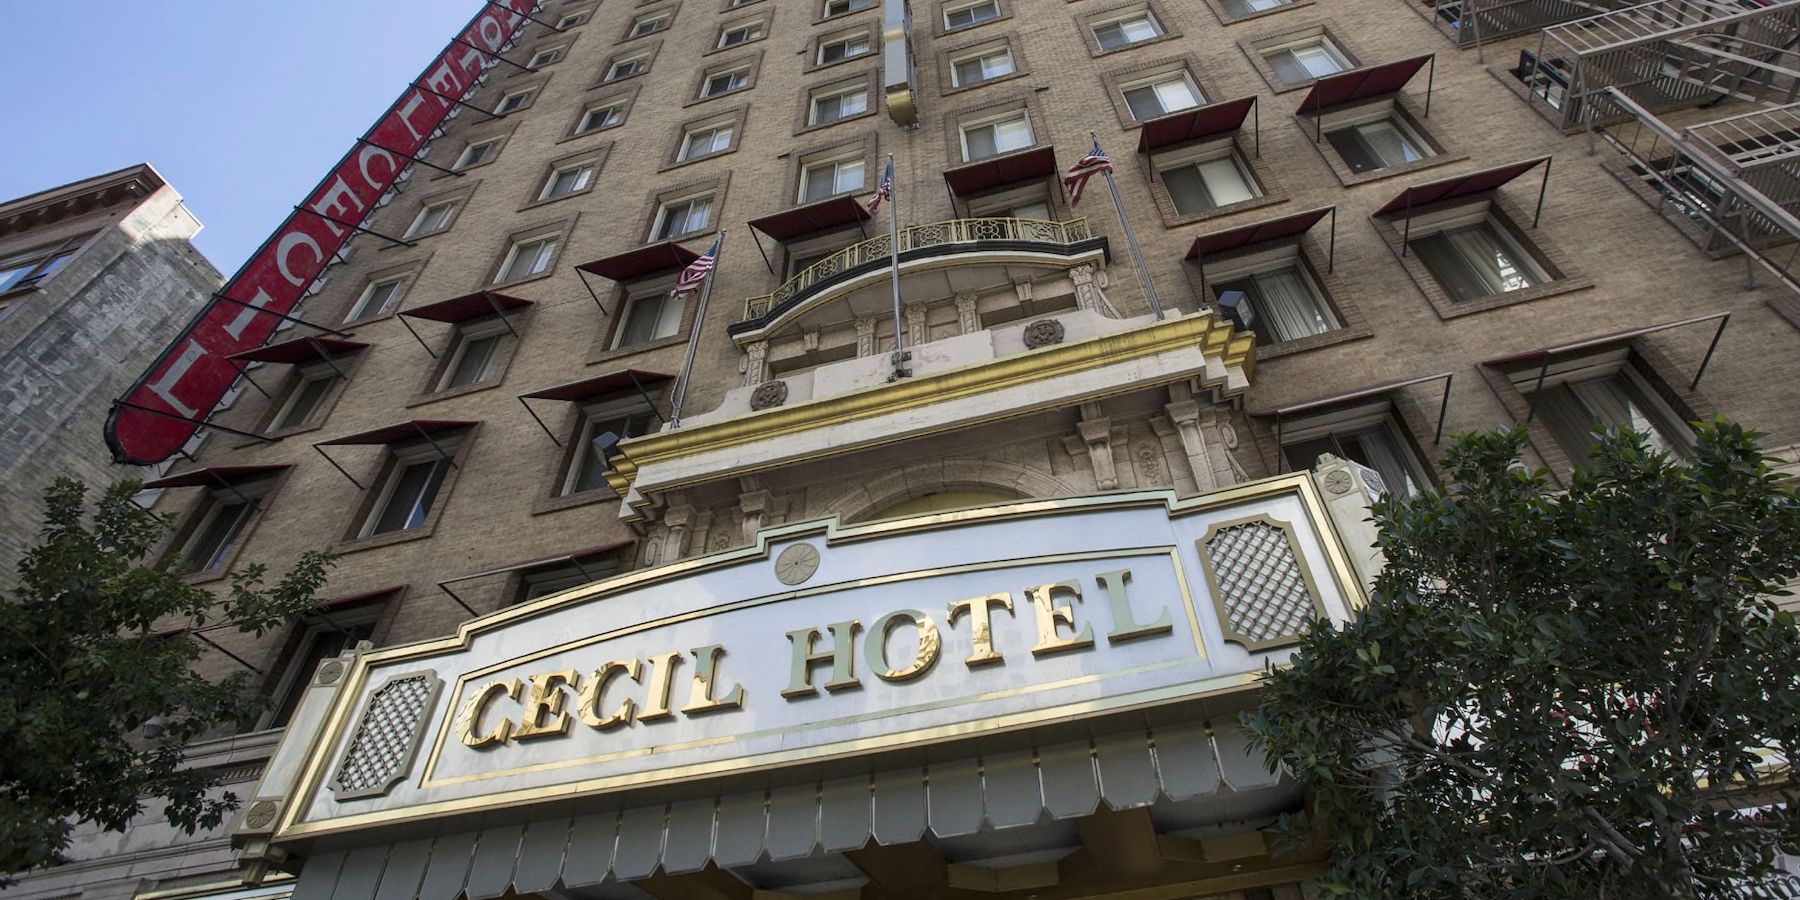 American Horror Story Season 5: The True Story Of The Cecil Hotel